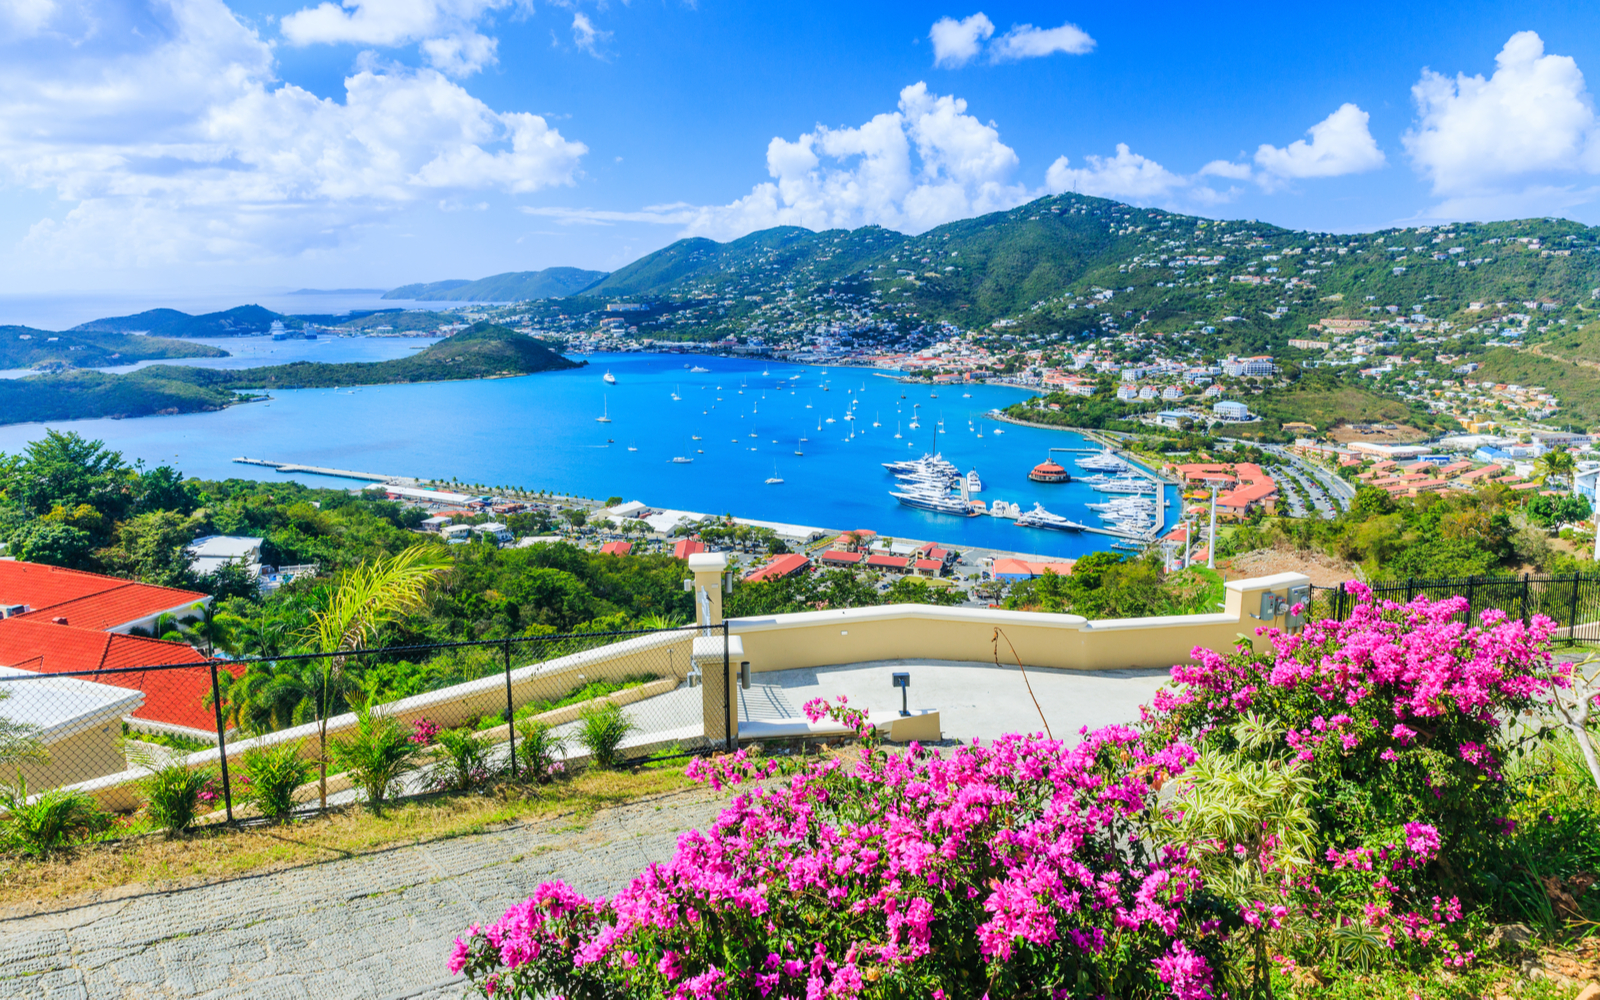 15 Best Resorts in St. Thomas in 2023